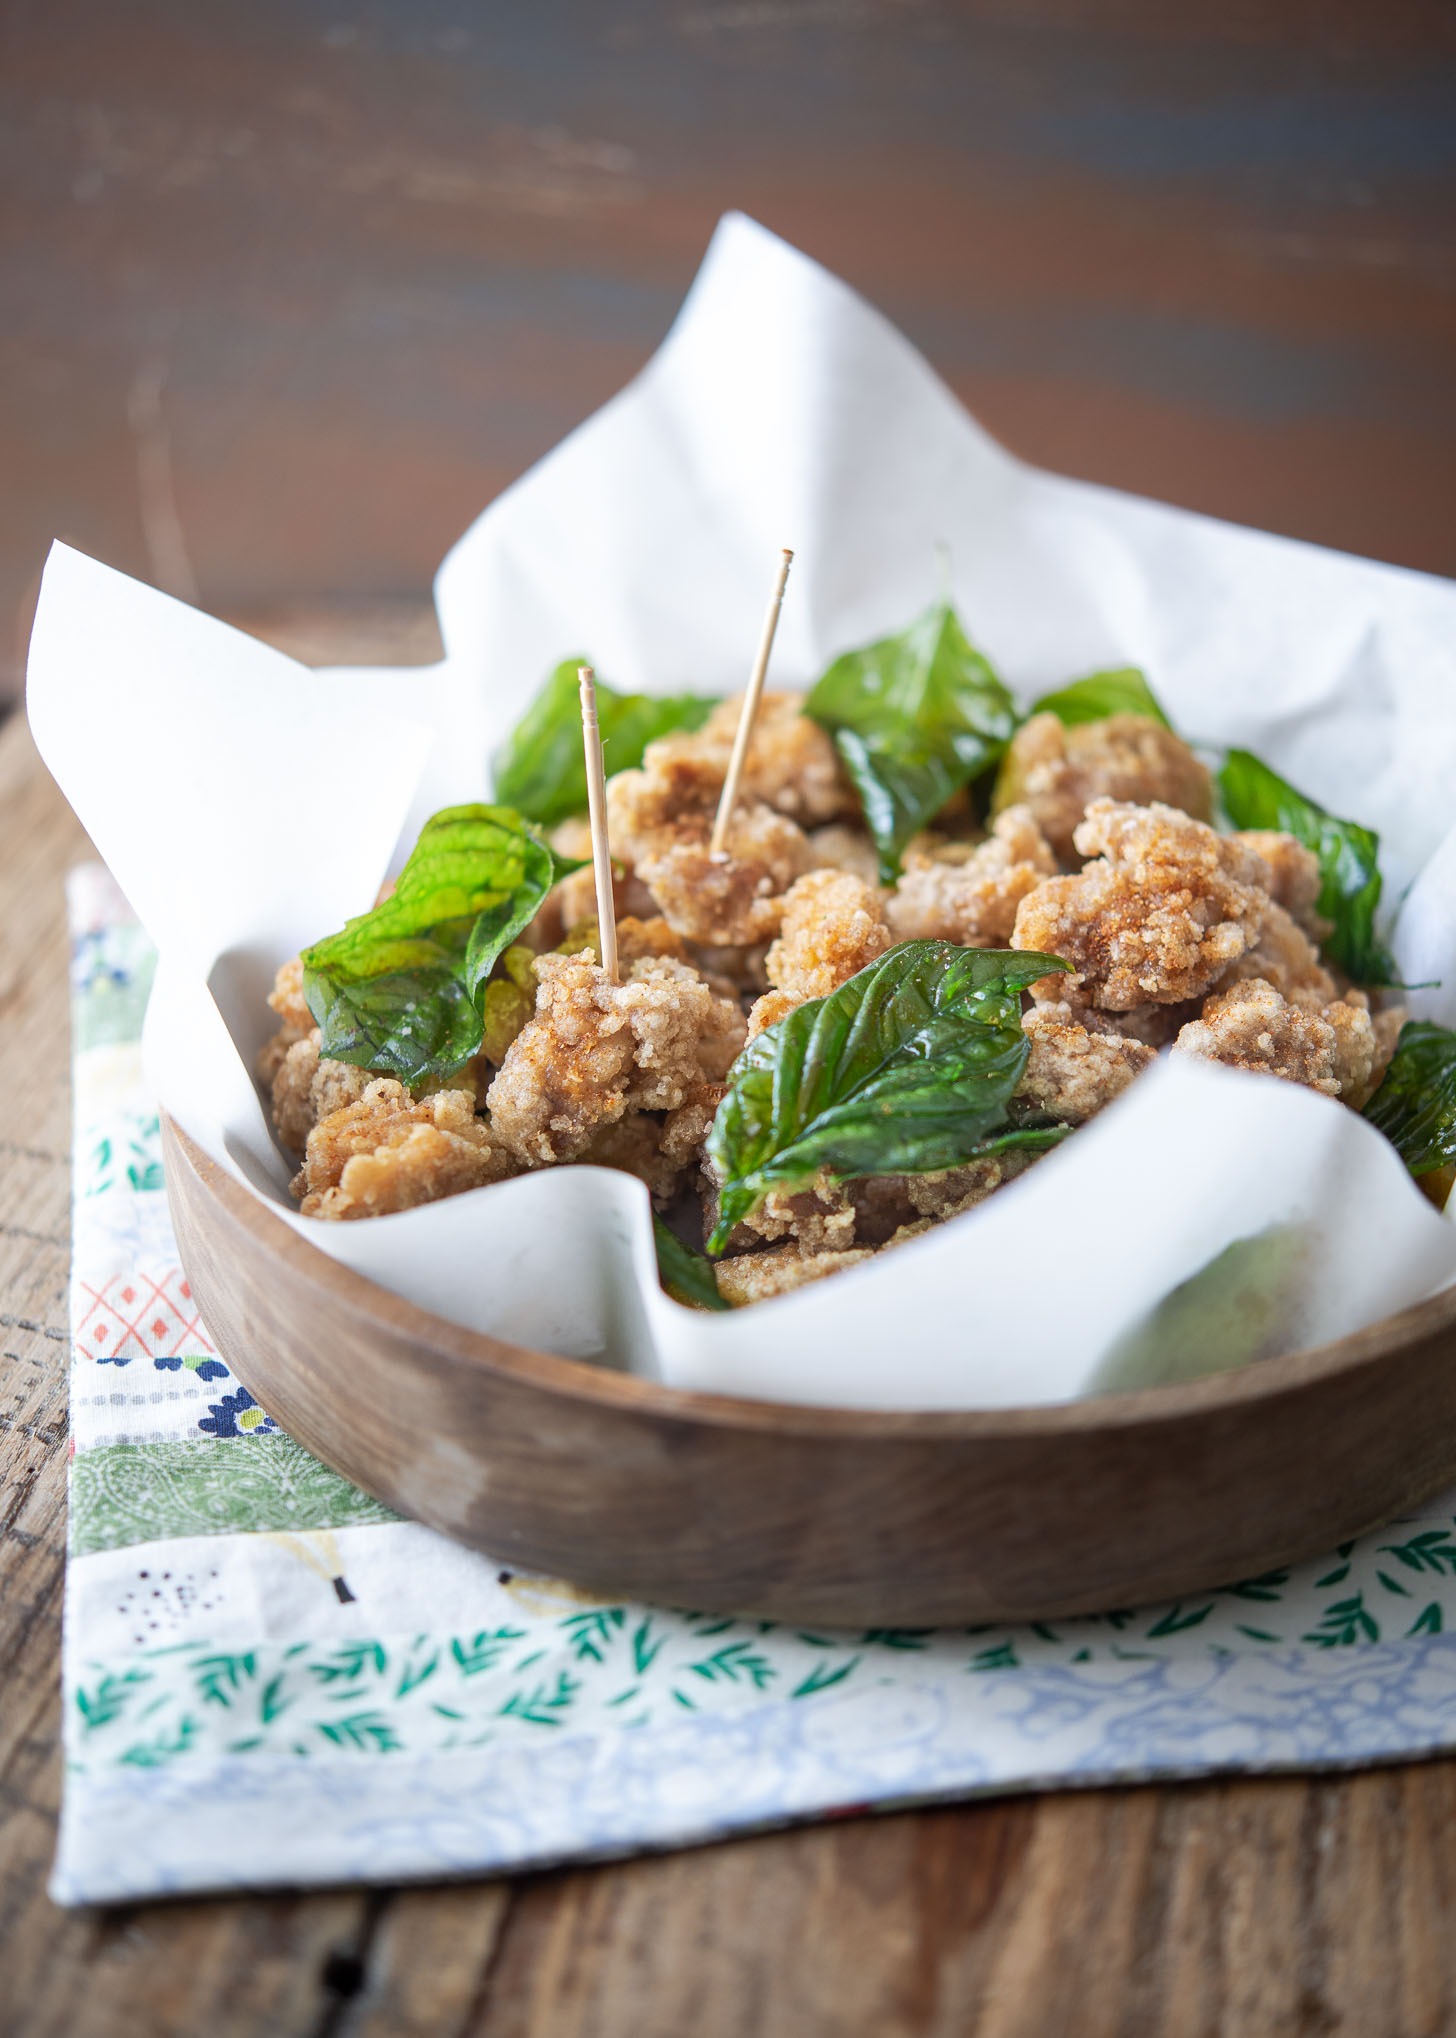 Taiwanese popcorn sized fried chicken garnished with fried Thai basil.